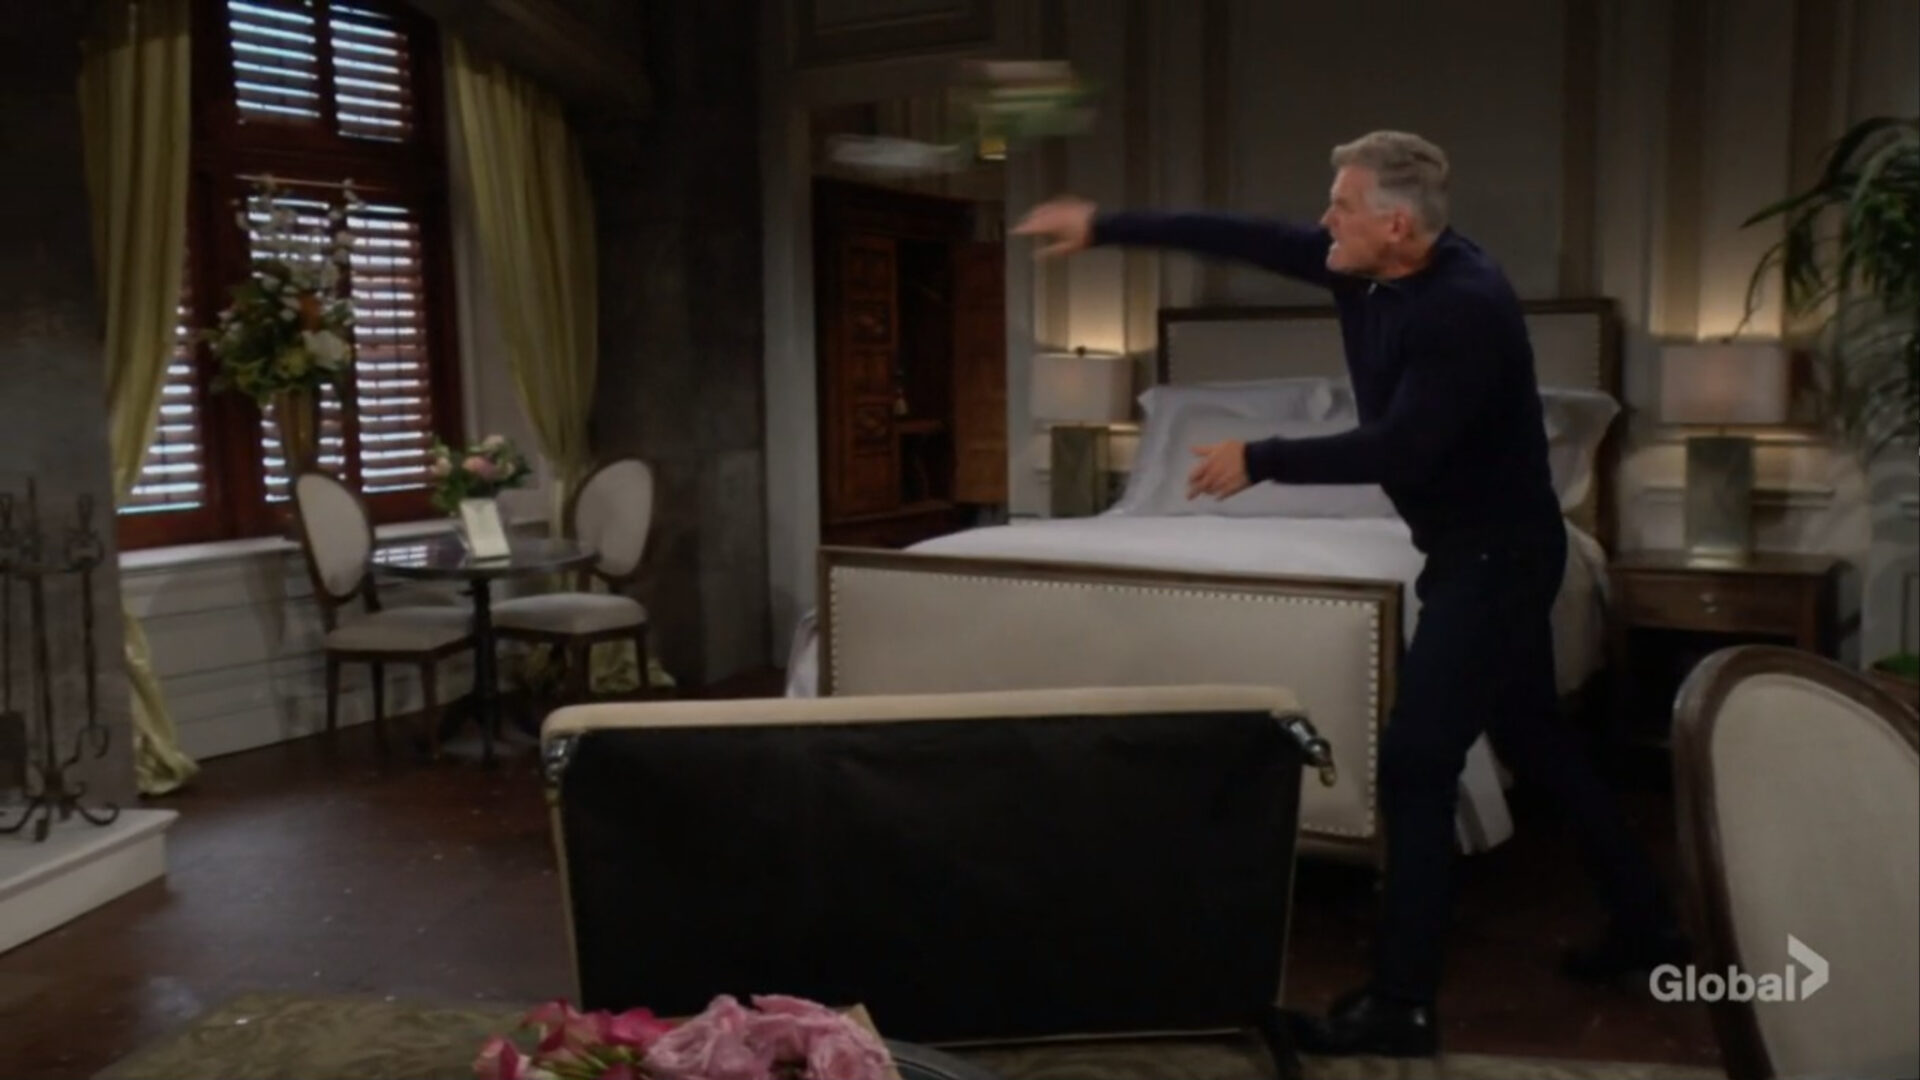 ashland tosses the hotel room young restless